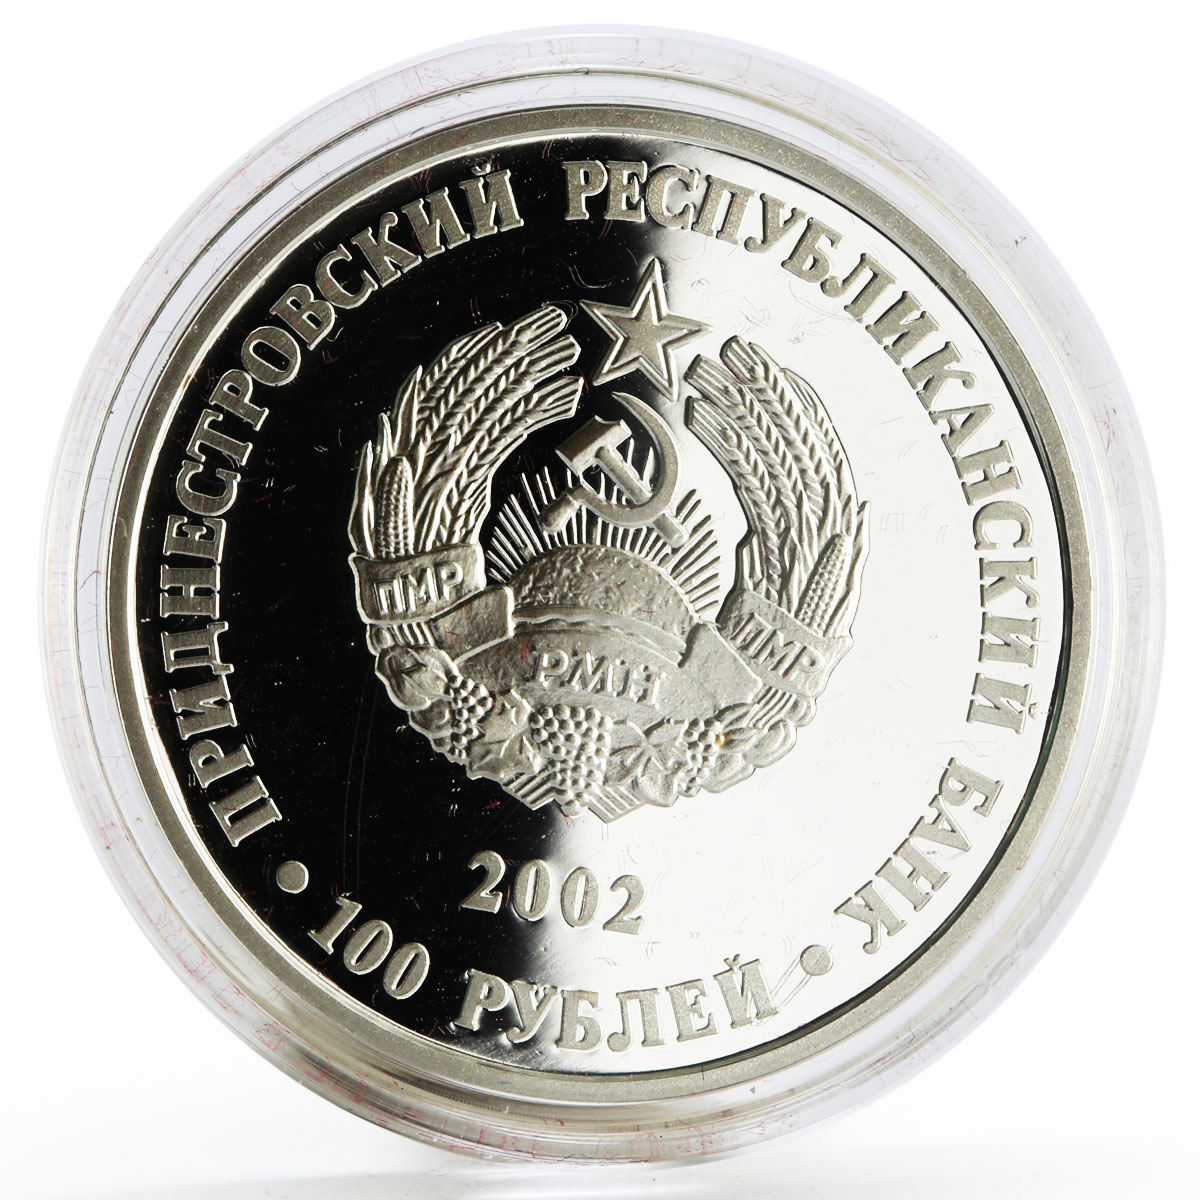 Transnistria 100 rubles Famous Transnistrians K.K Gedroits silver coin 2002